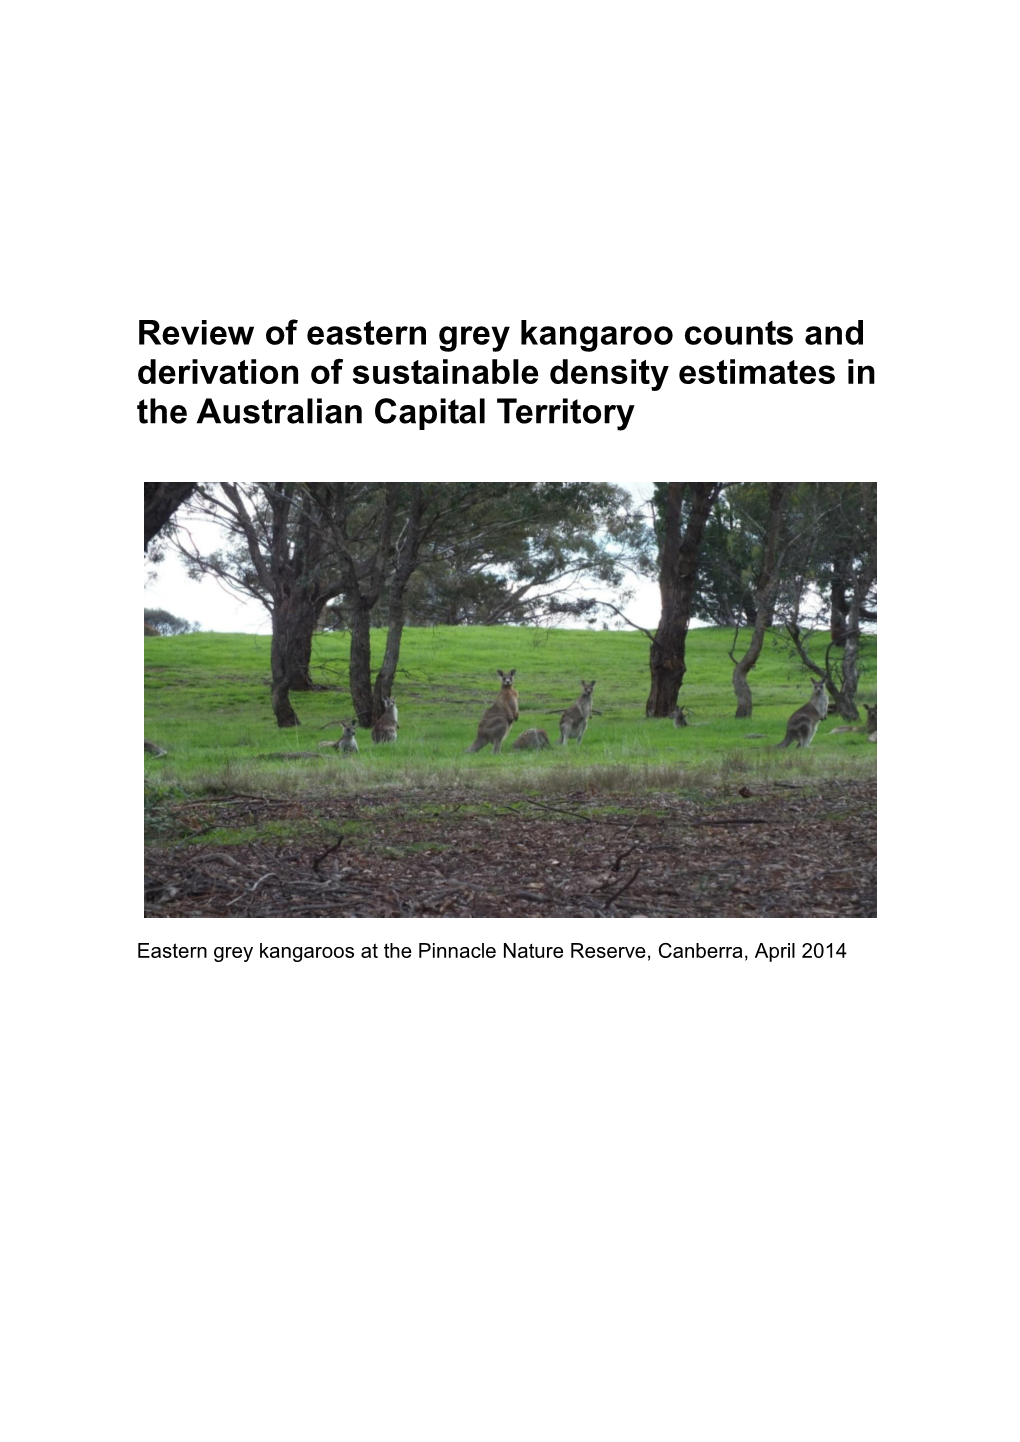 Review of Eastern Grey Kangaroo Counts and Derivation of Sustainable Density Estimates in the Australian Capital Territory